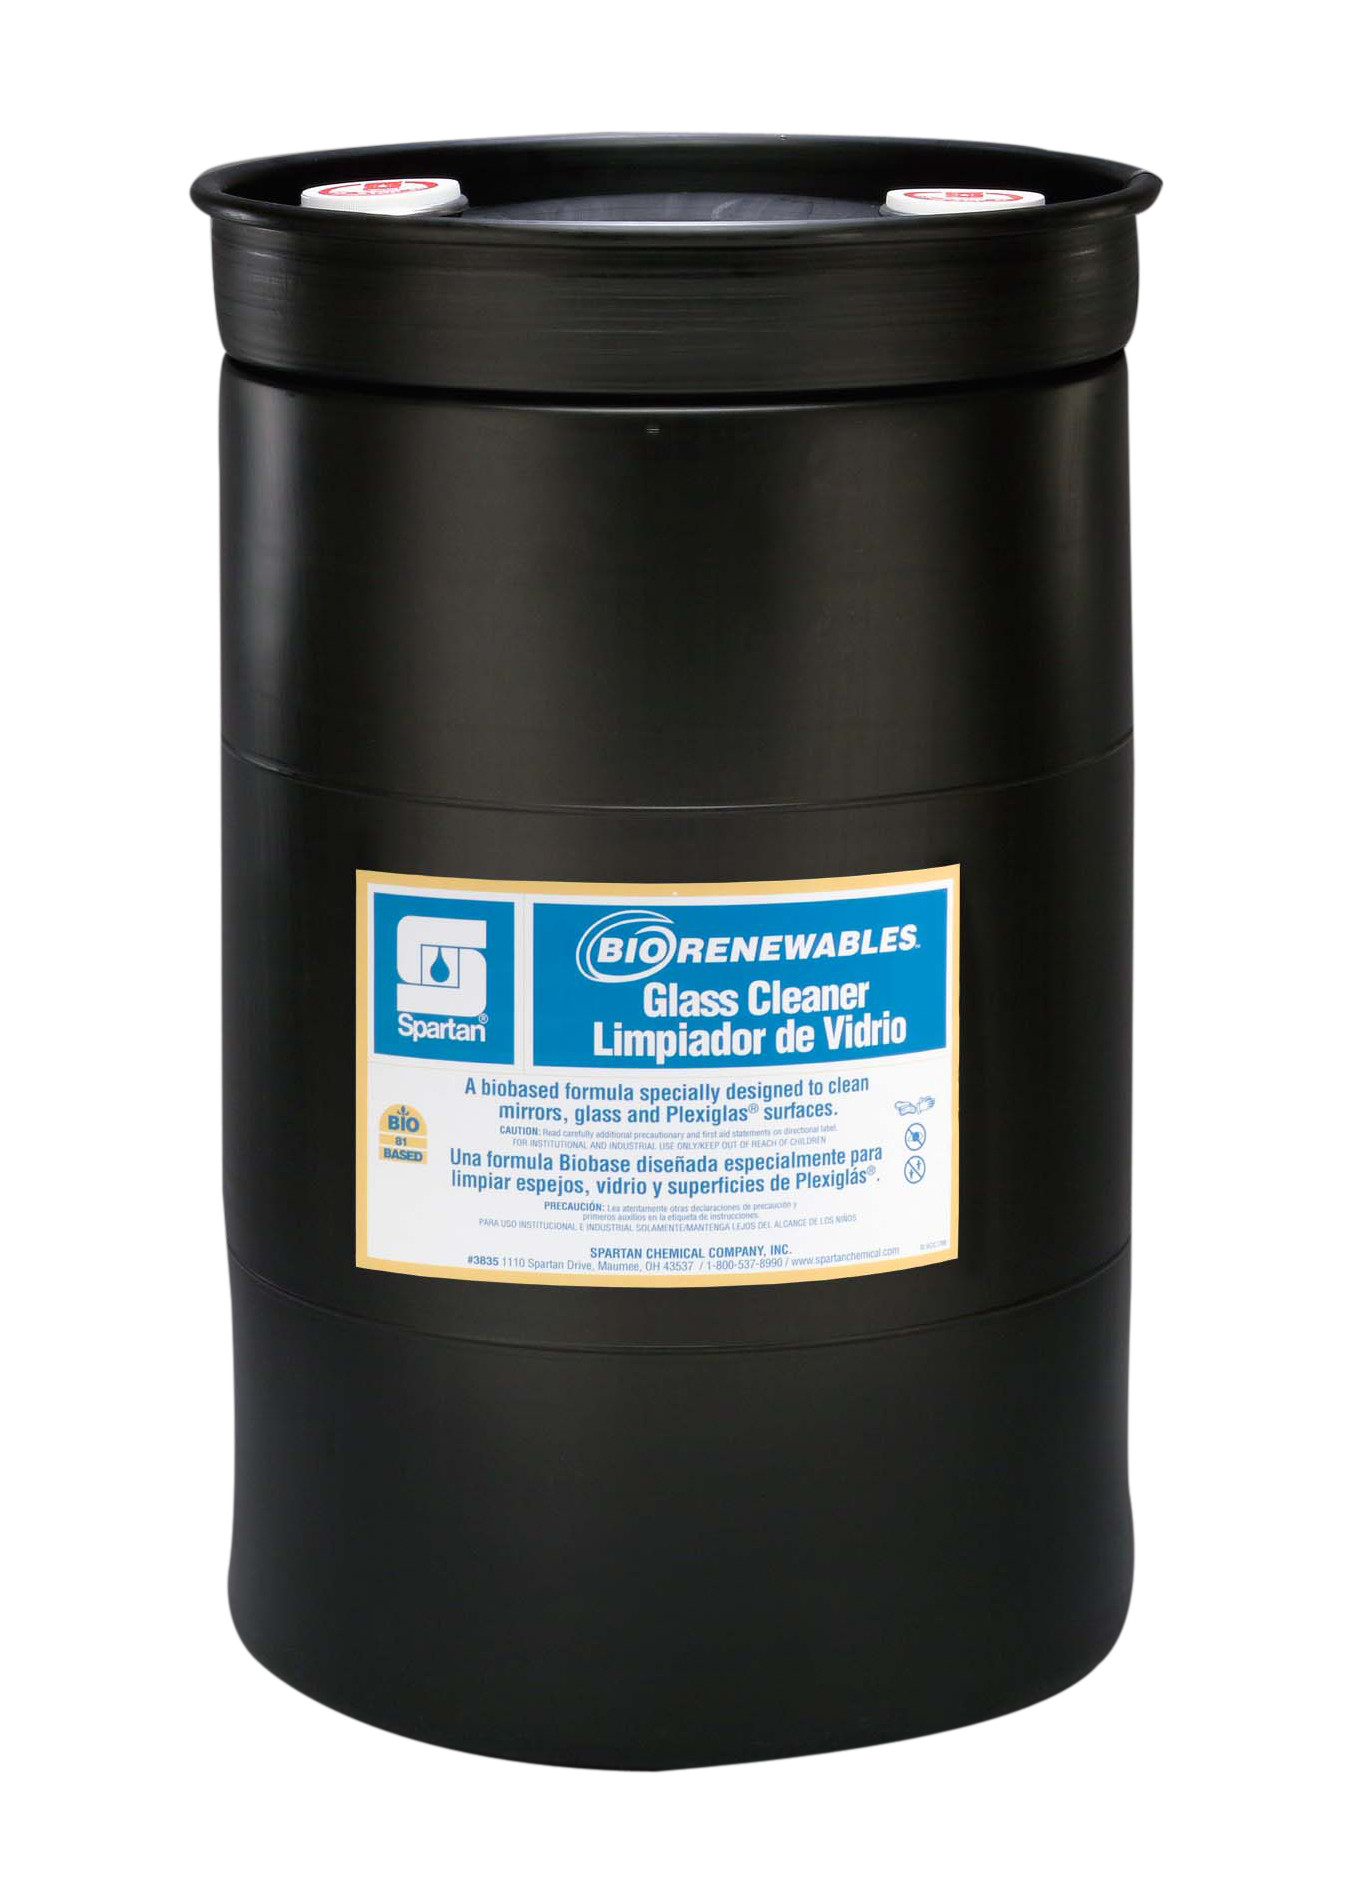 Spartan Chemical Company BioRenewables Glass Cleaner, 30 GAL DRUM